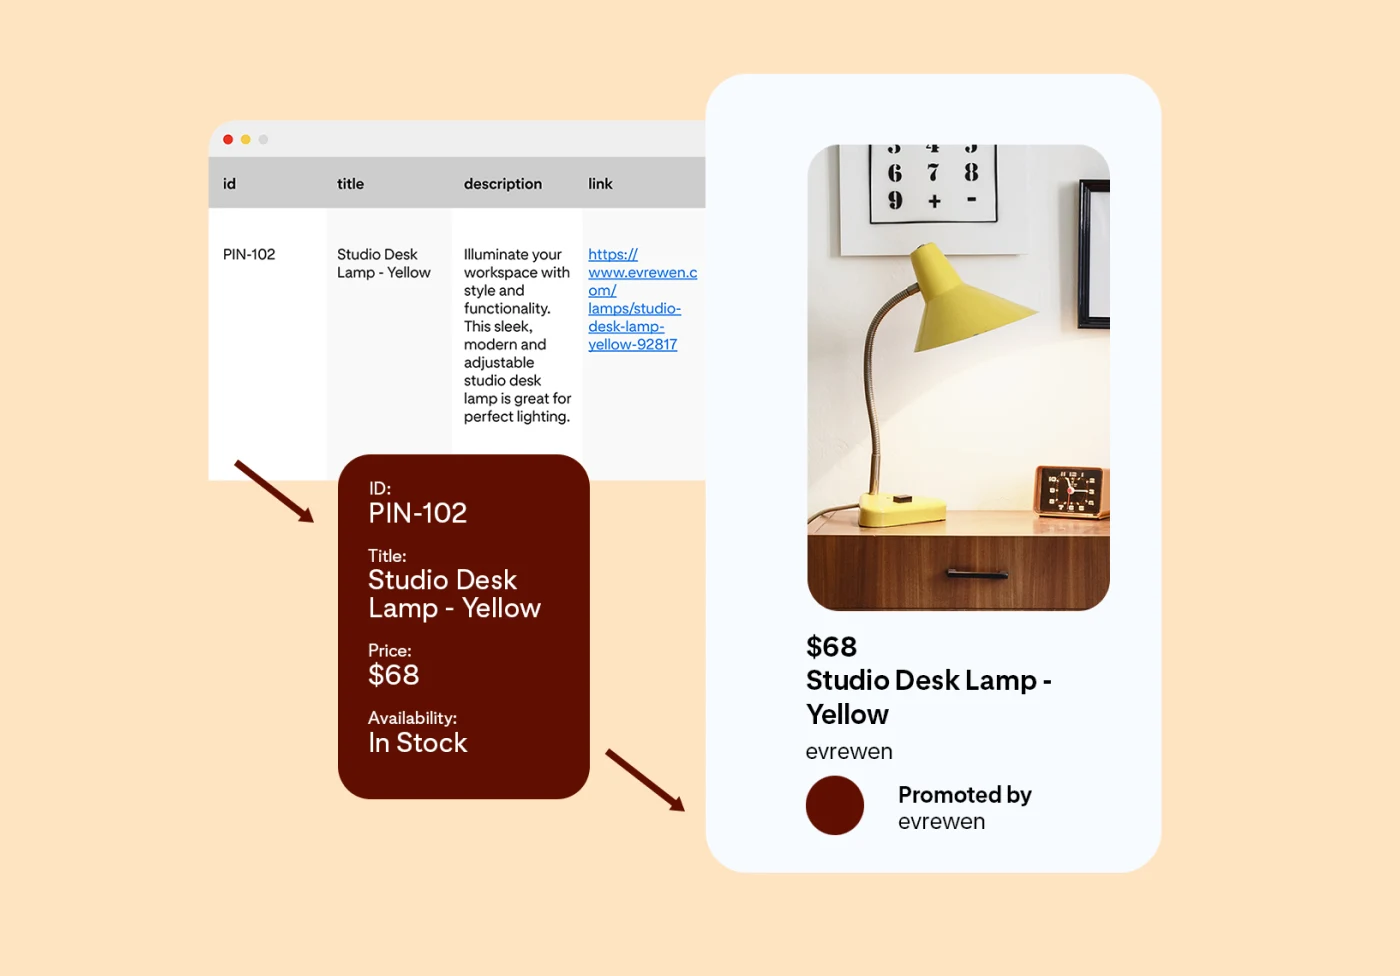 Three images depicting the product catalogue upload process: a spreadsheet with a single item, a yellow studio desk lamp, detailed information extracted from the spreadsheet and the resulting advertisement promoting the yellow lamp by evrewen.